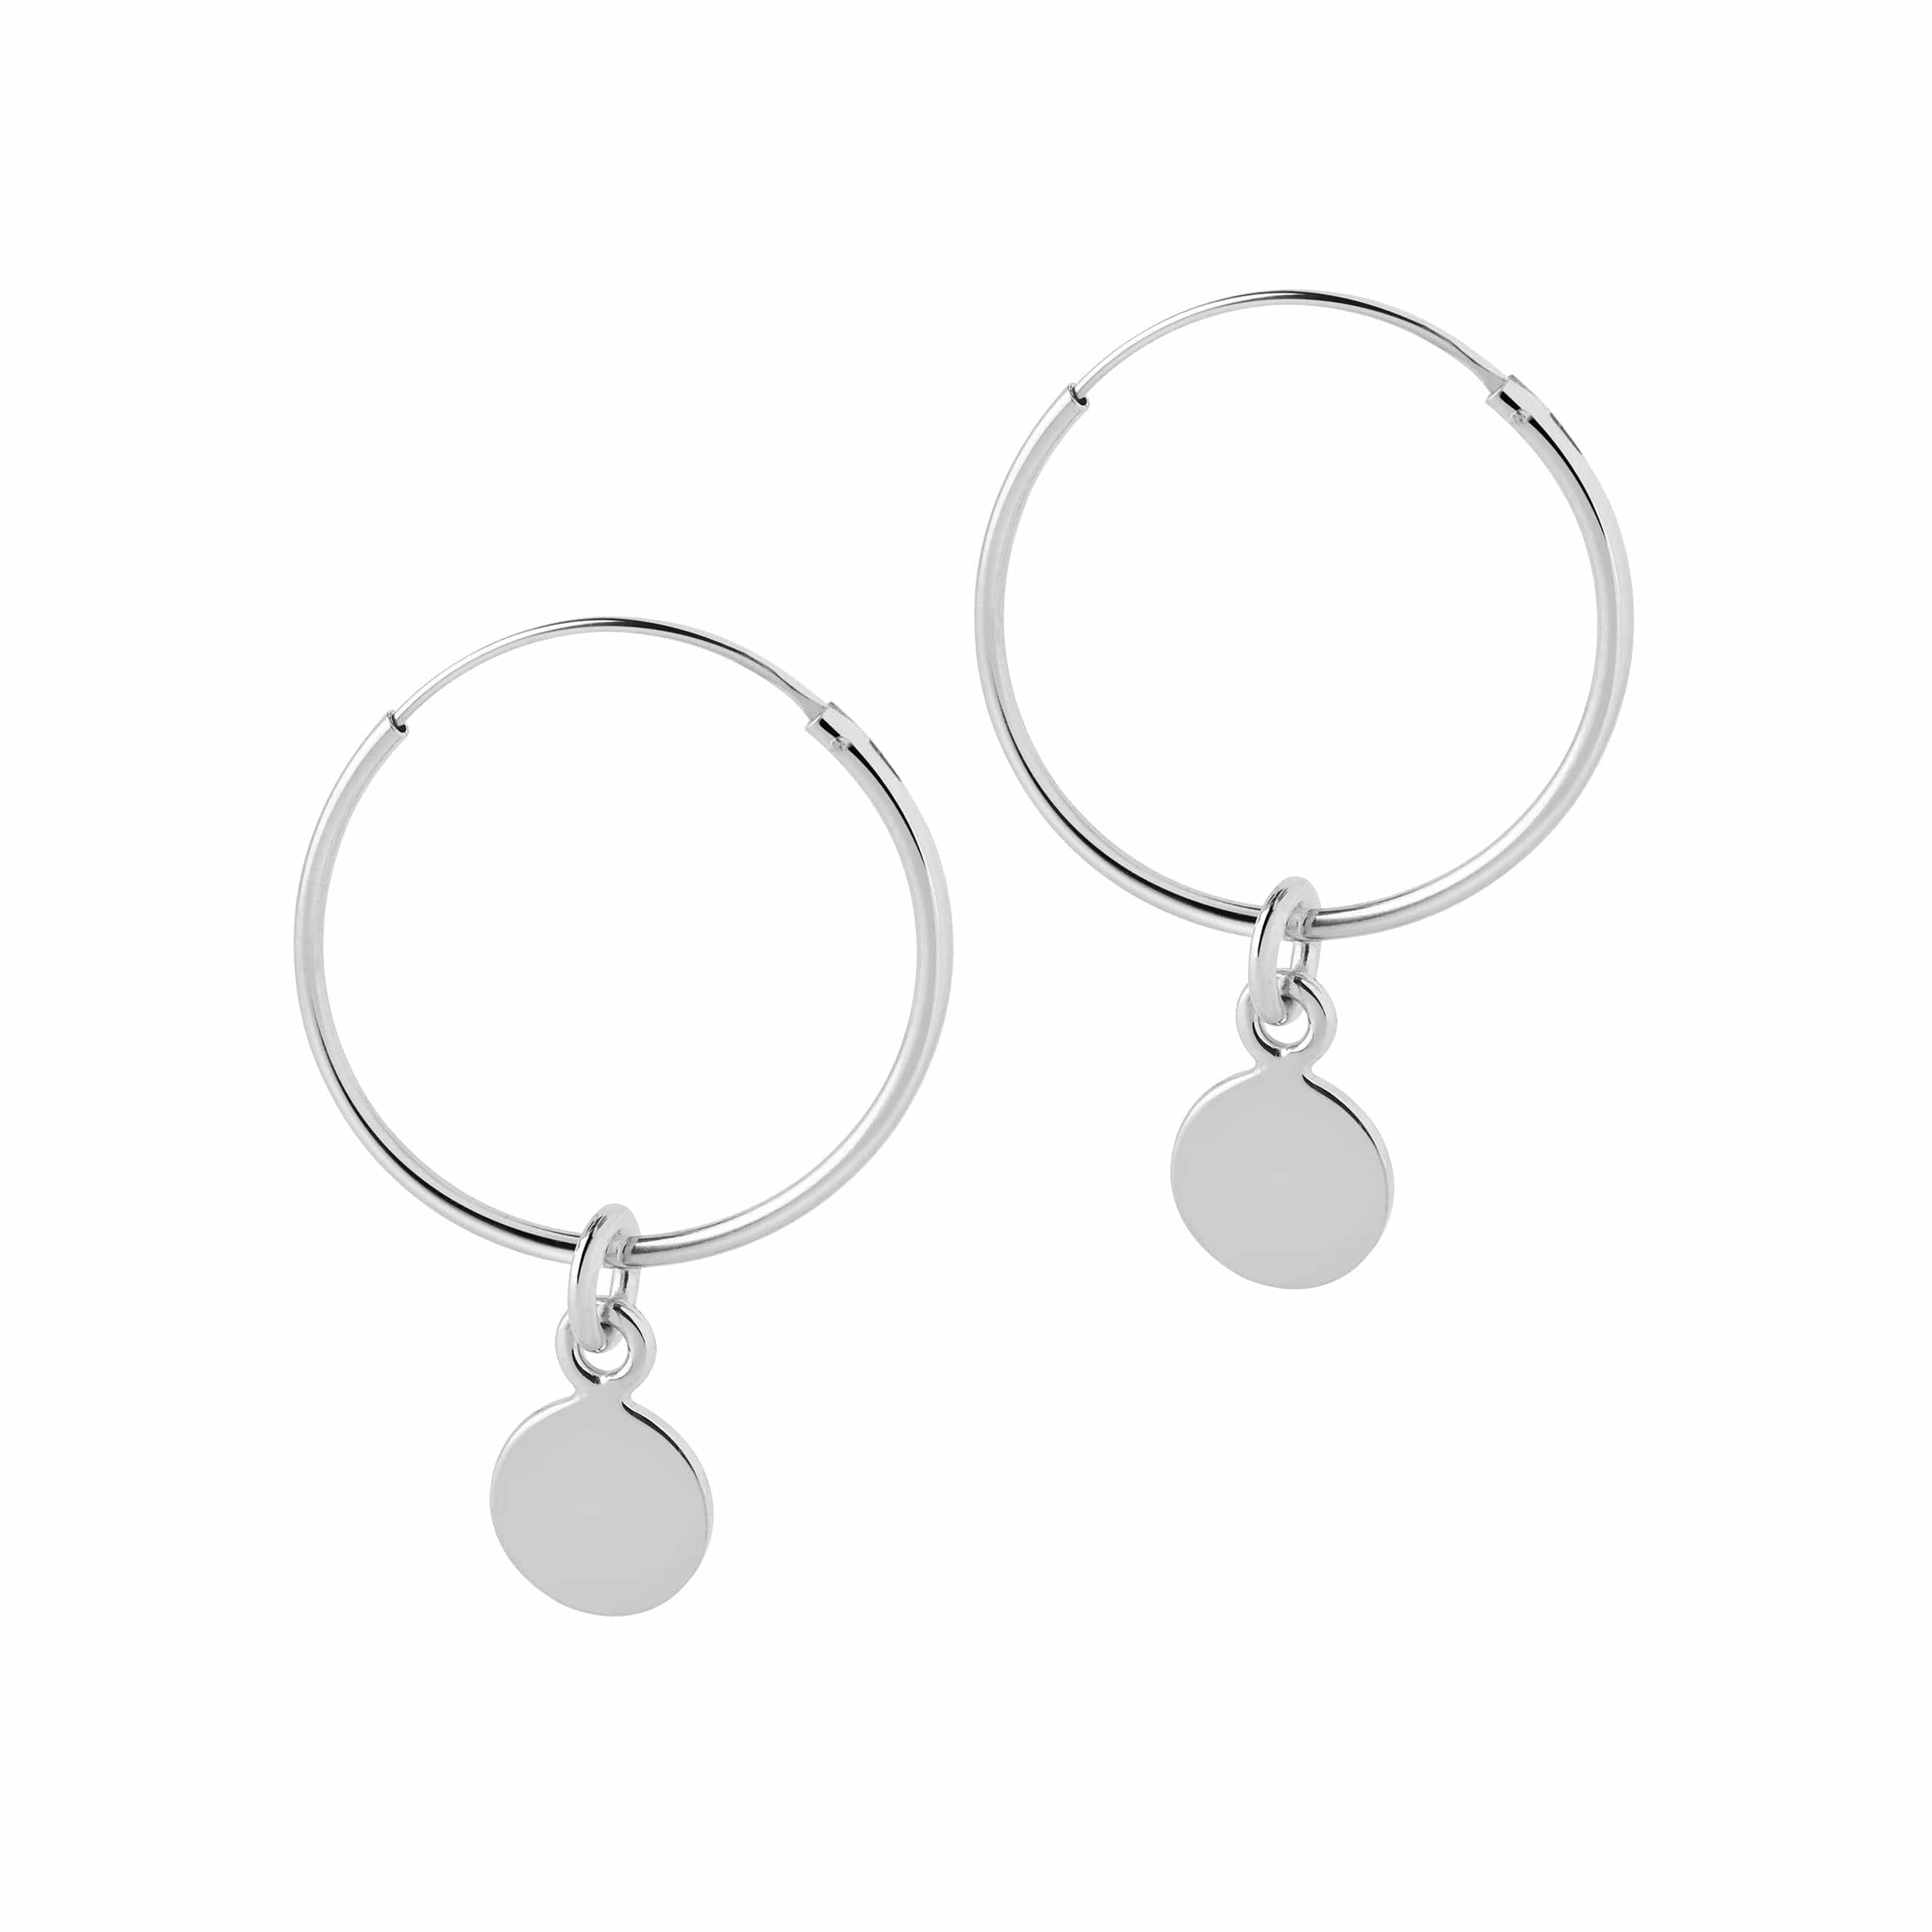 22 mm silver hoop earrings with round pendant